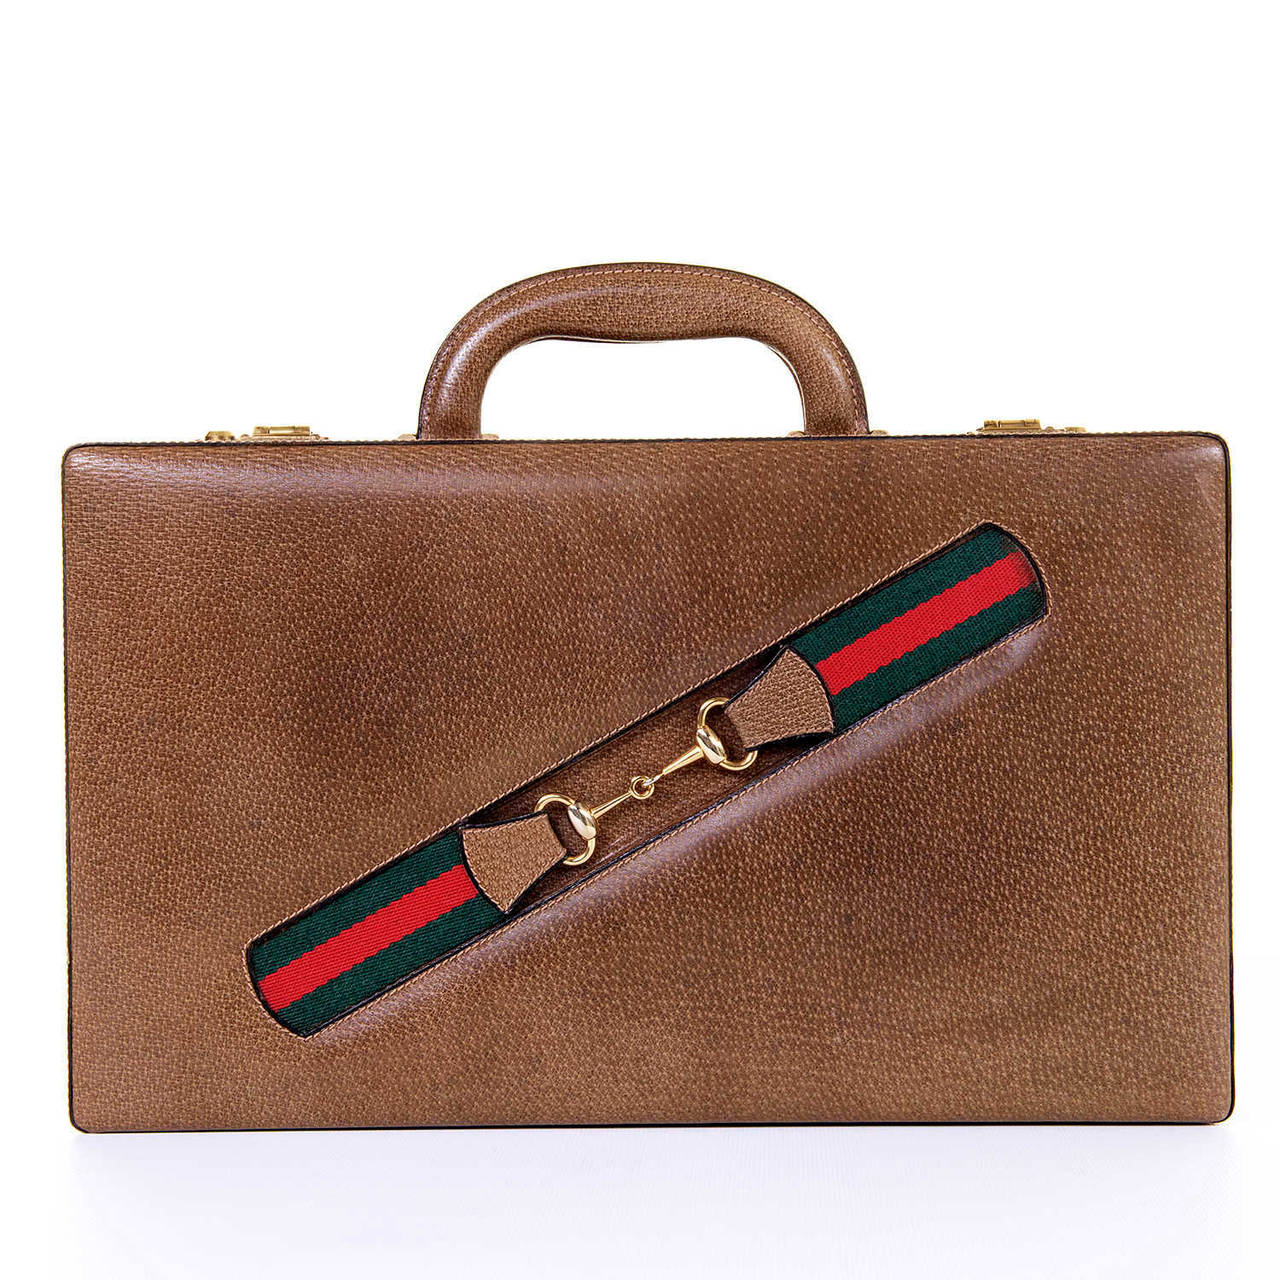 A fabulous cased 'Backgammon' set by the famous House of Gucci.The outside is finished in a grained light brown leather, with a signature Gucci faux-belt in red & green to the front, with gold tone hardware. The inside is finished with inlaid